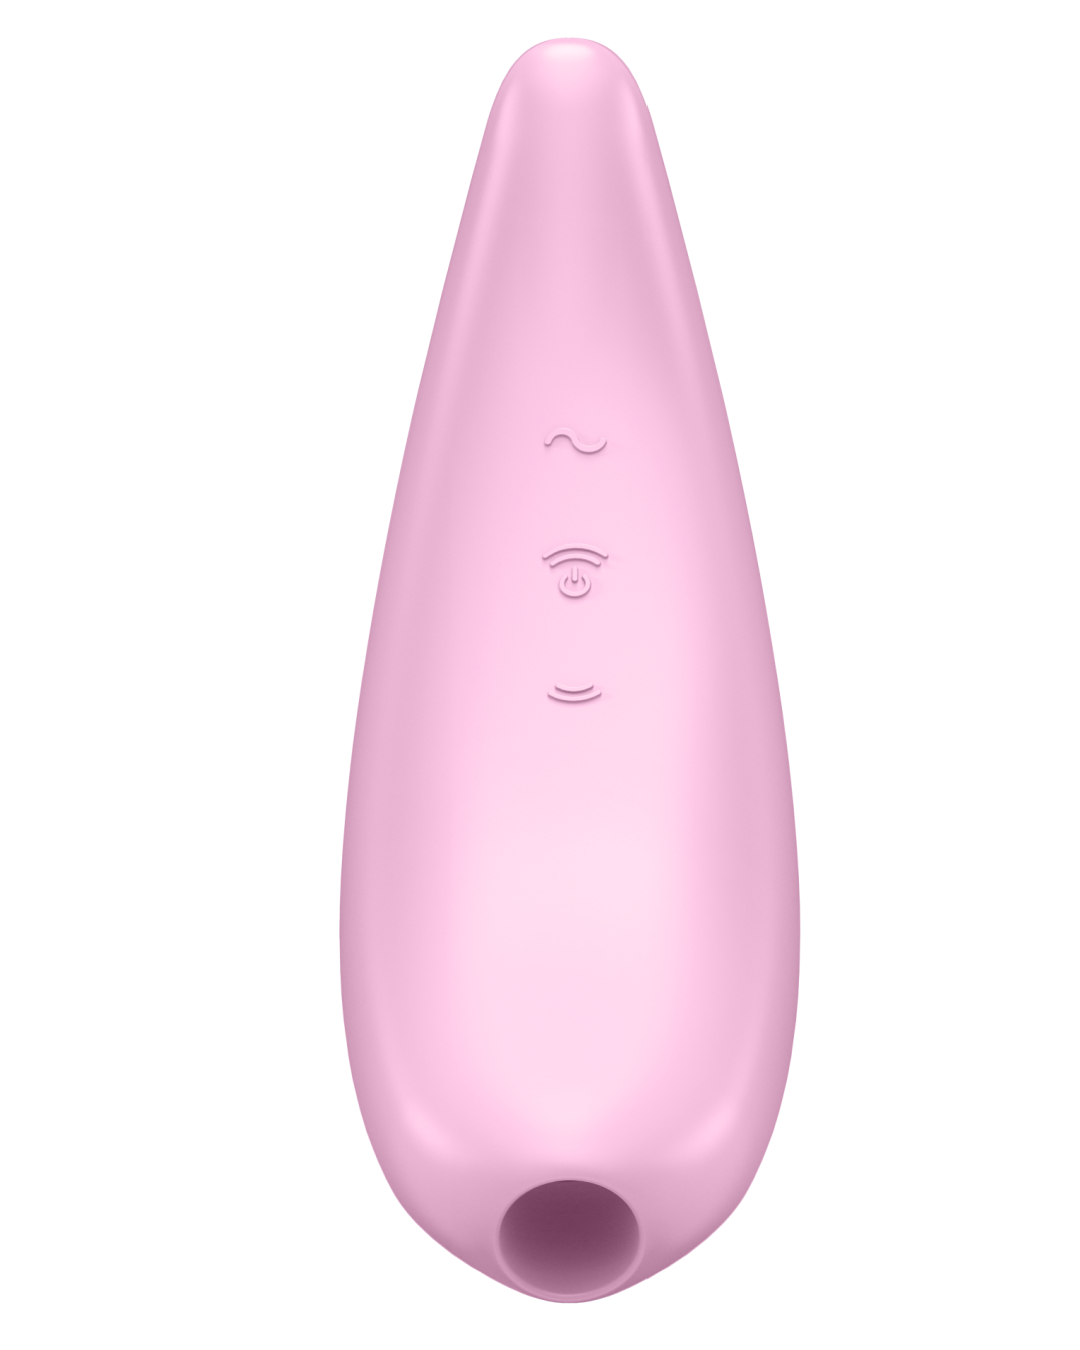 Satisfyer Curvy 3+ Pressure Wave + Vibration Stimulator - Pale Pink  face on showing the clitoral hole and buttons